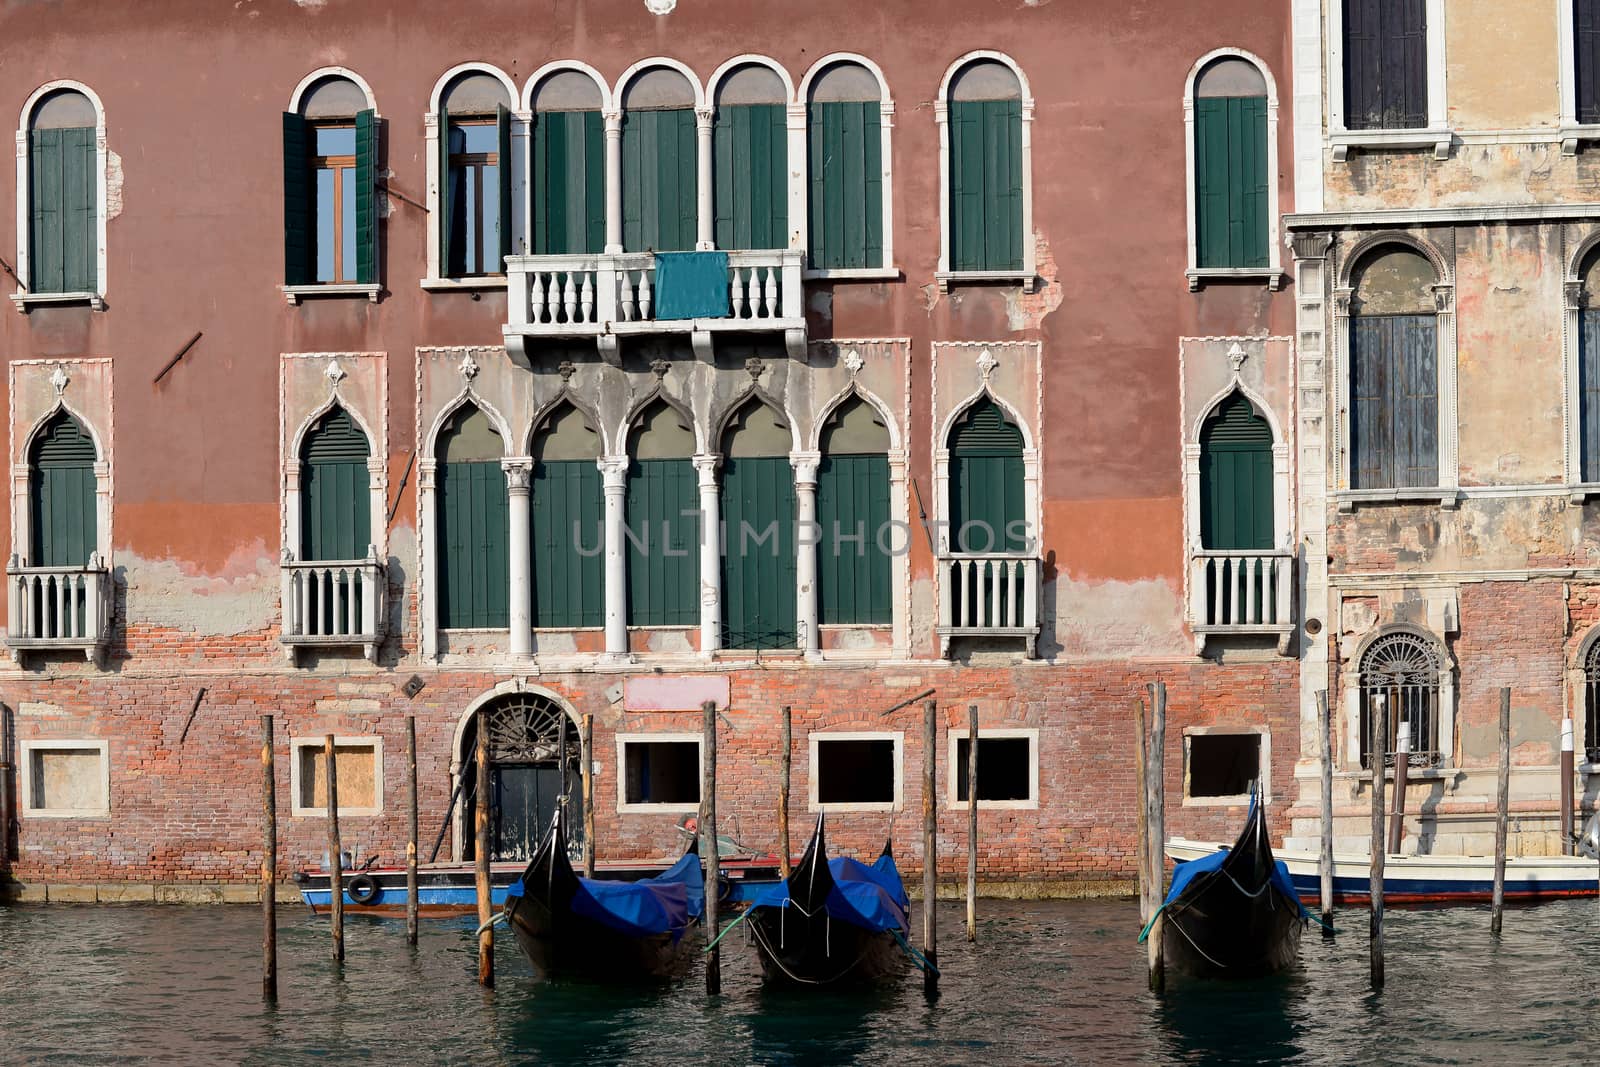 Gondolas floating on Canal with traditional building in the background, Venice, Italy